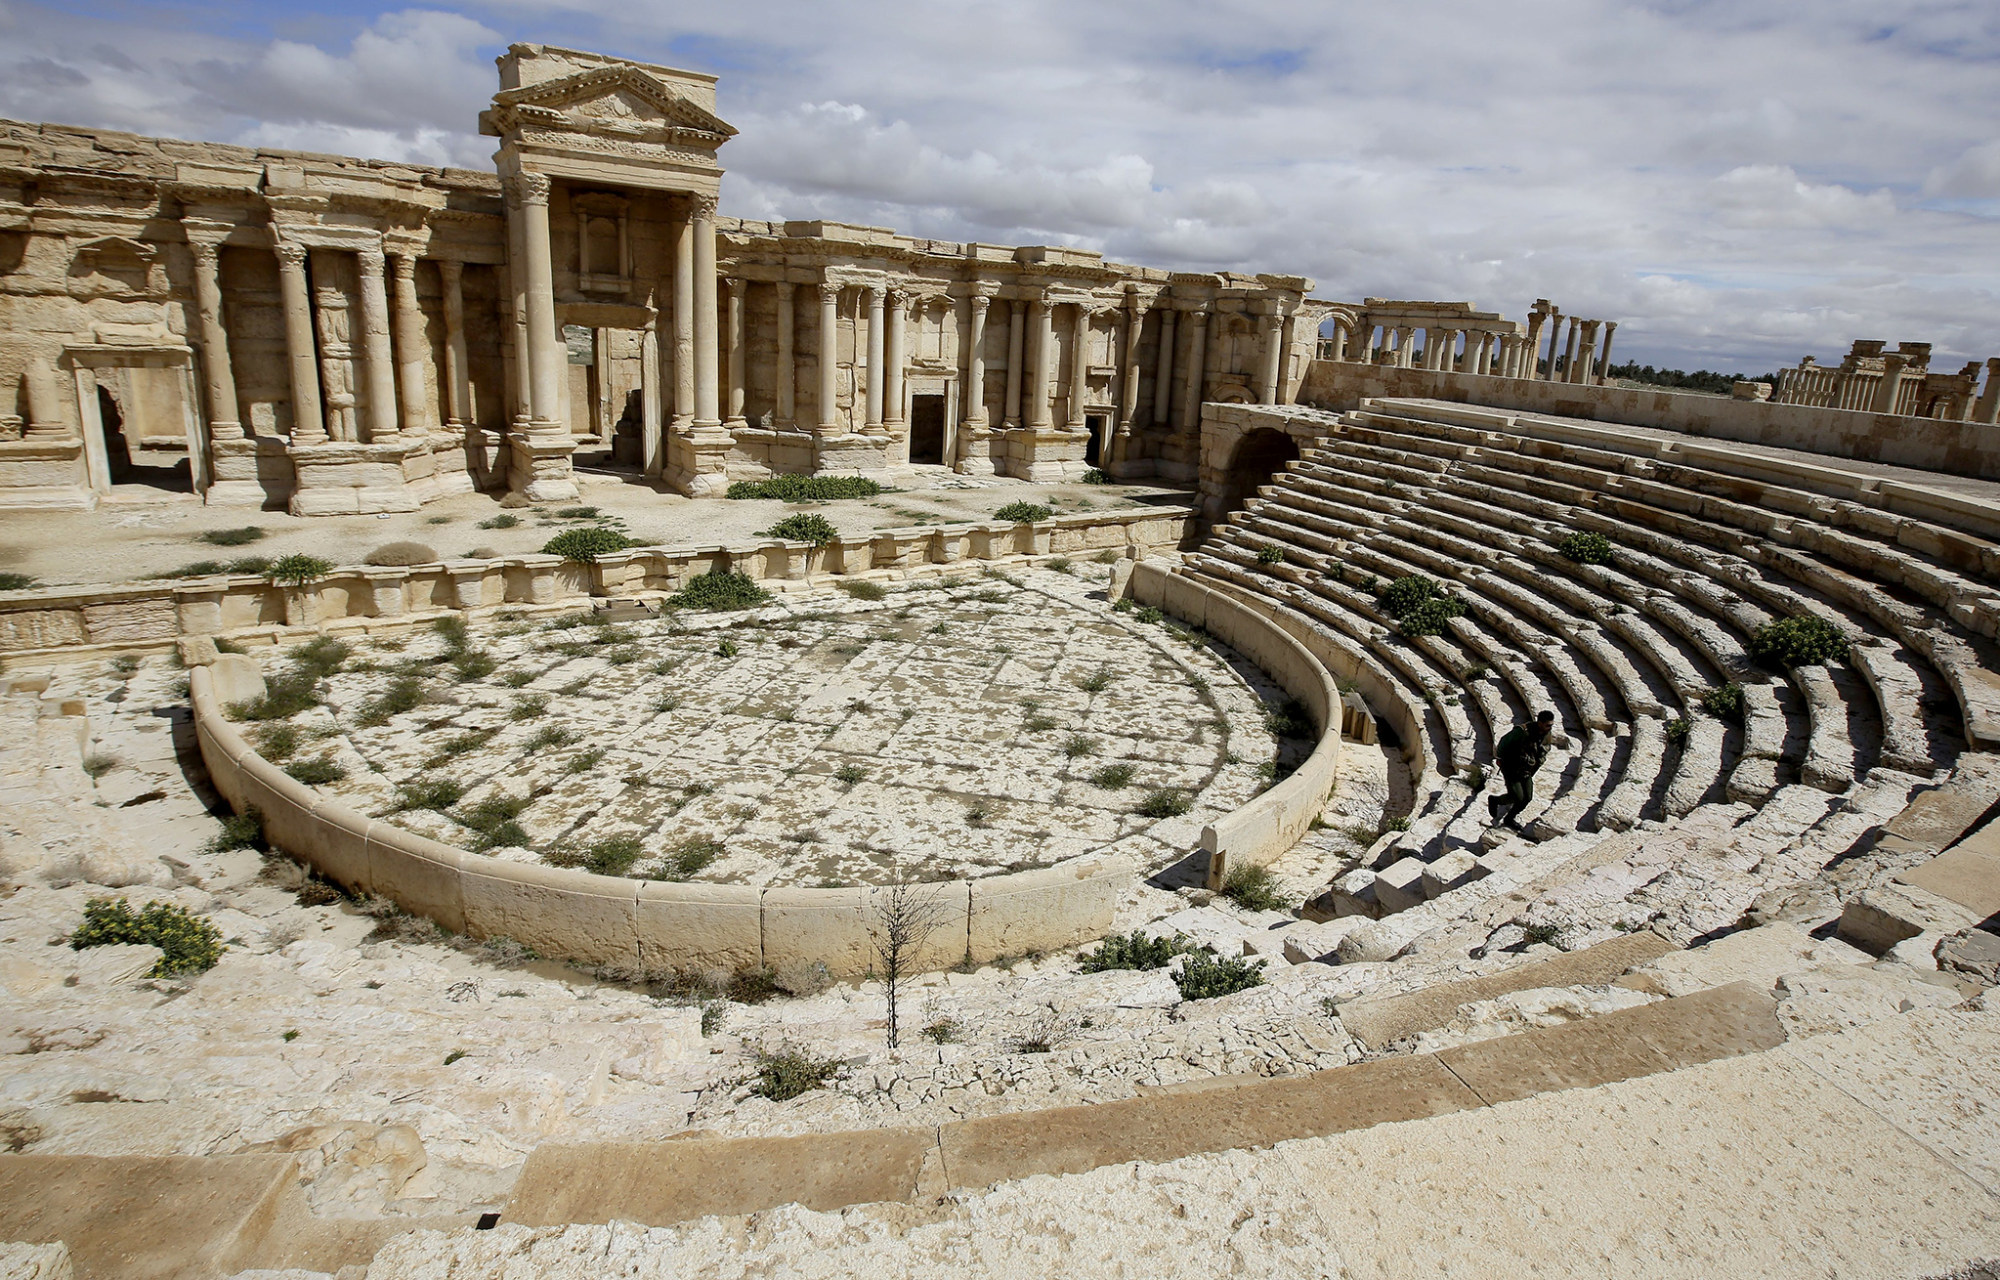 A picture taken in 2014 shows a partial view of the theater at the ancient city of Palmyra.
